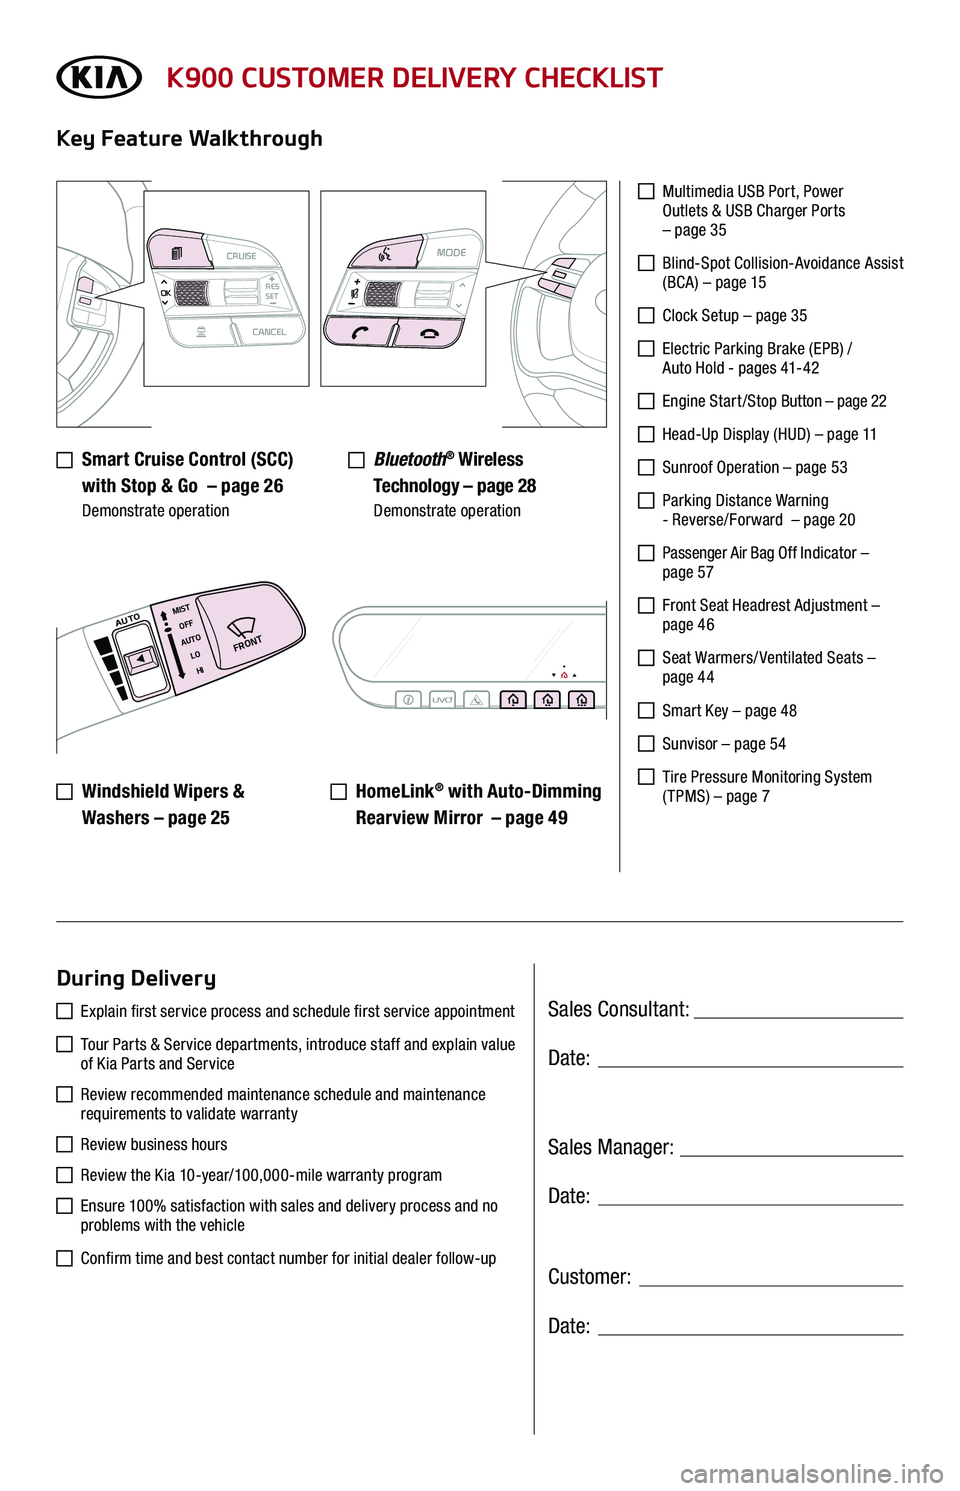 KIA K900 2020  Features and Functions Guide Sales Consultant:
Sales Manager:
Customer:
Date:
Date:
Date:
K900 CUSTOMER DELIVERY CHECKLIST
   Smart Cruise Control (SCC)  
with Stop & Go  – page 26 Demonstrate operation
Key Feature Walkthrough
